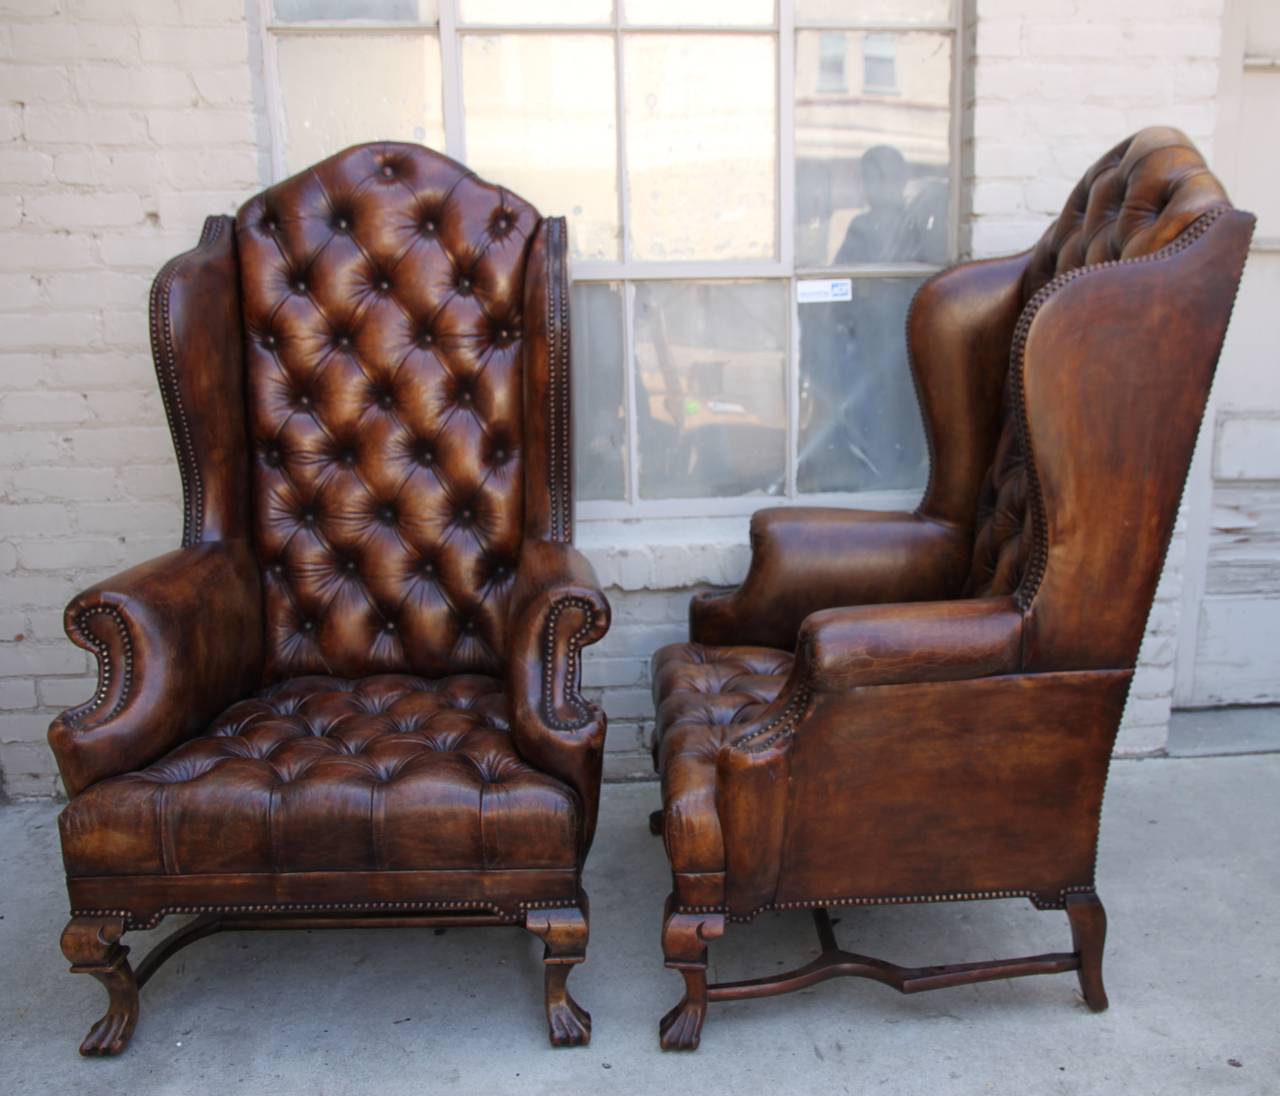 Pair of high back English Leather Tufted Armchairs with nail head trim detail.